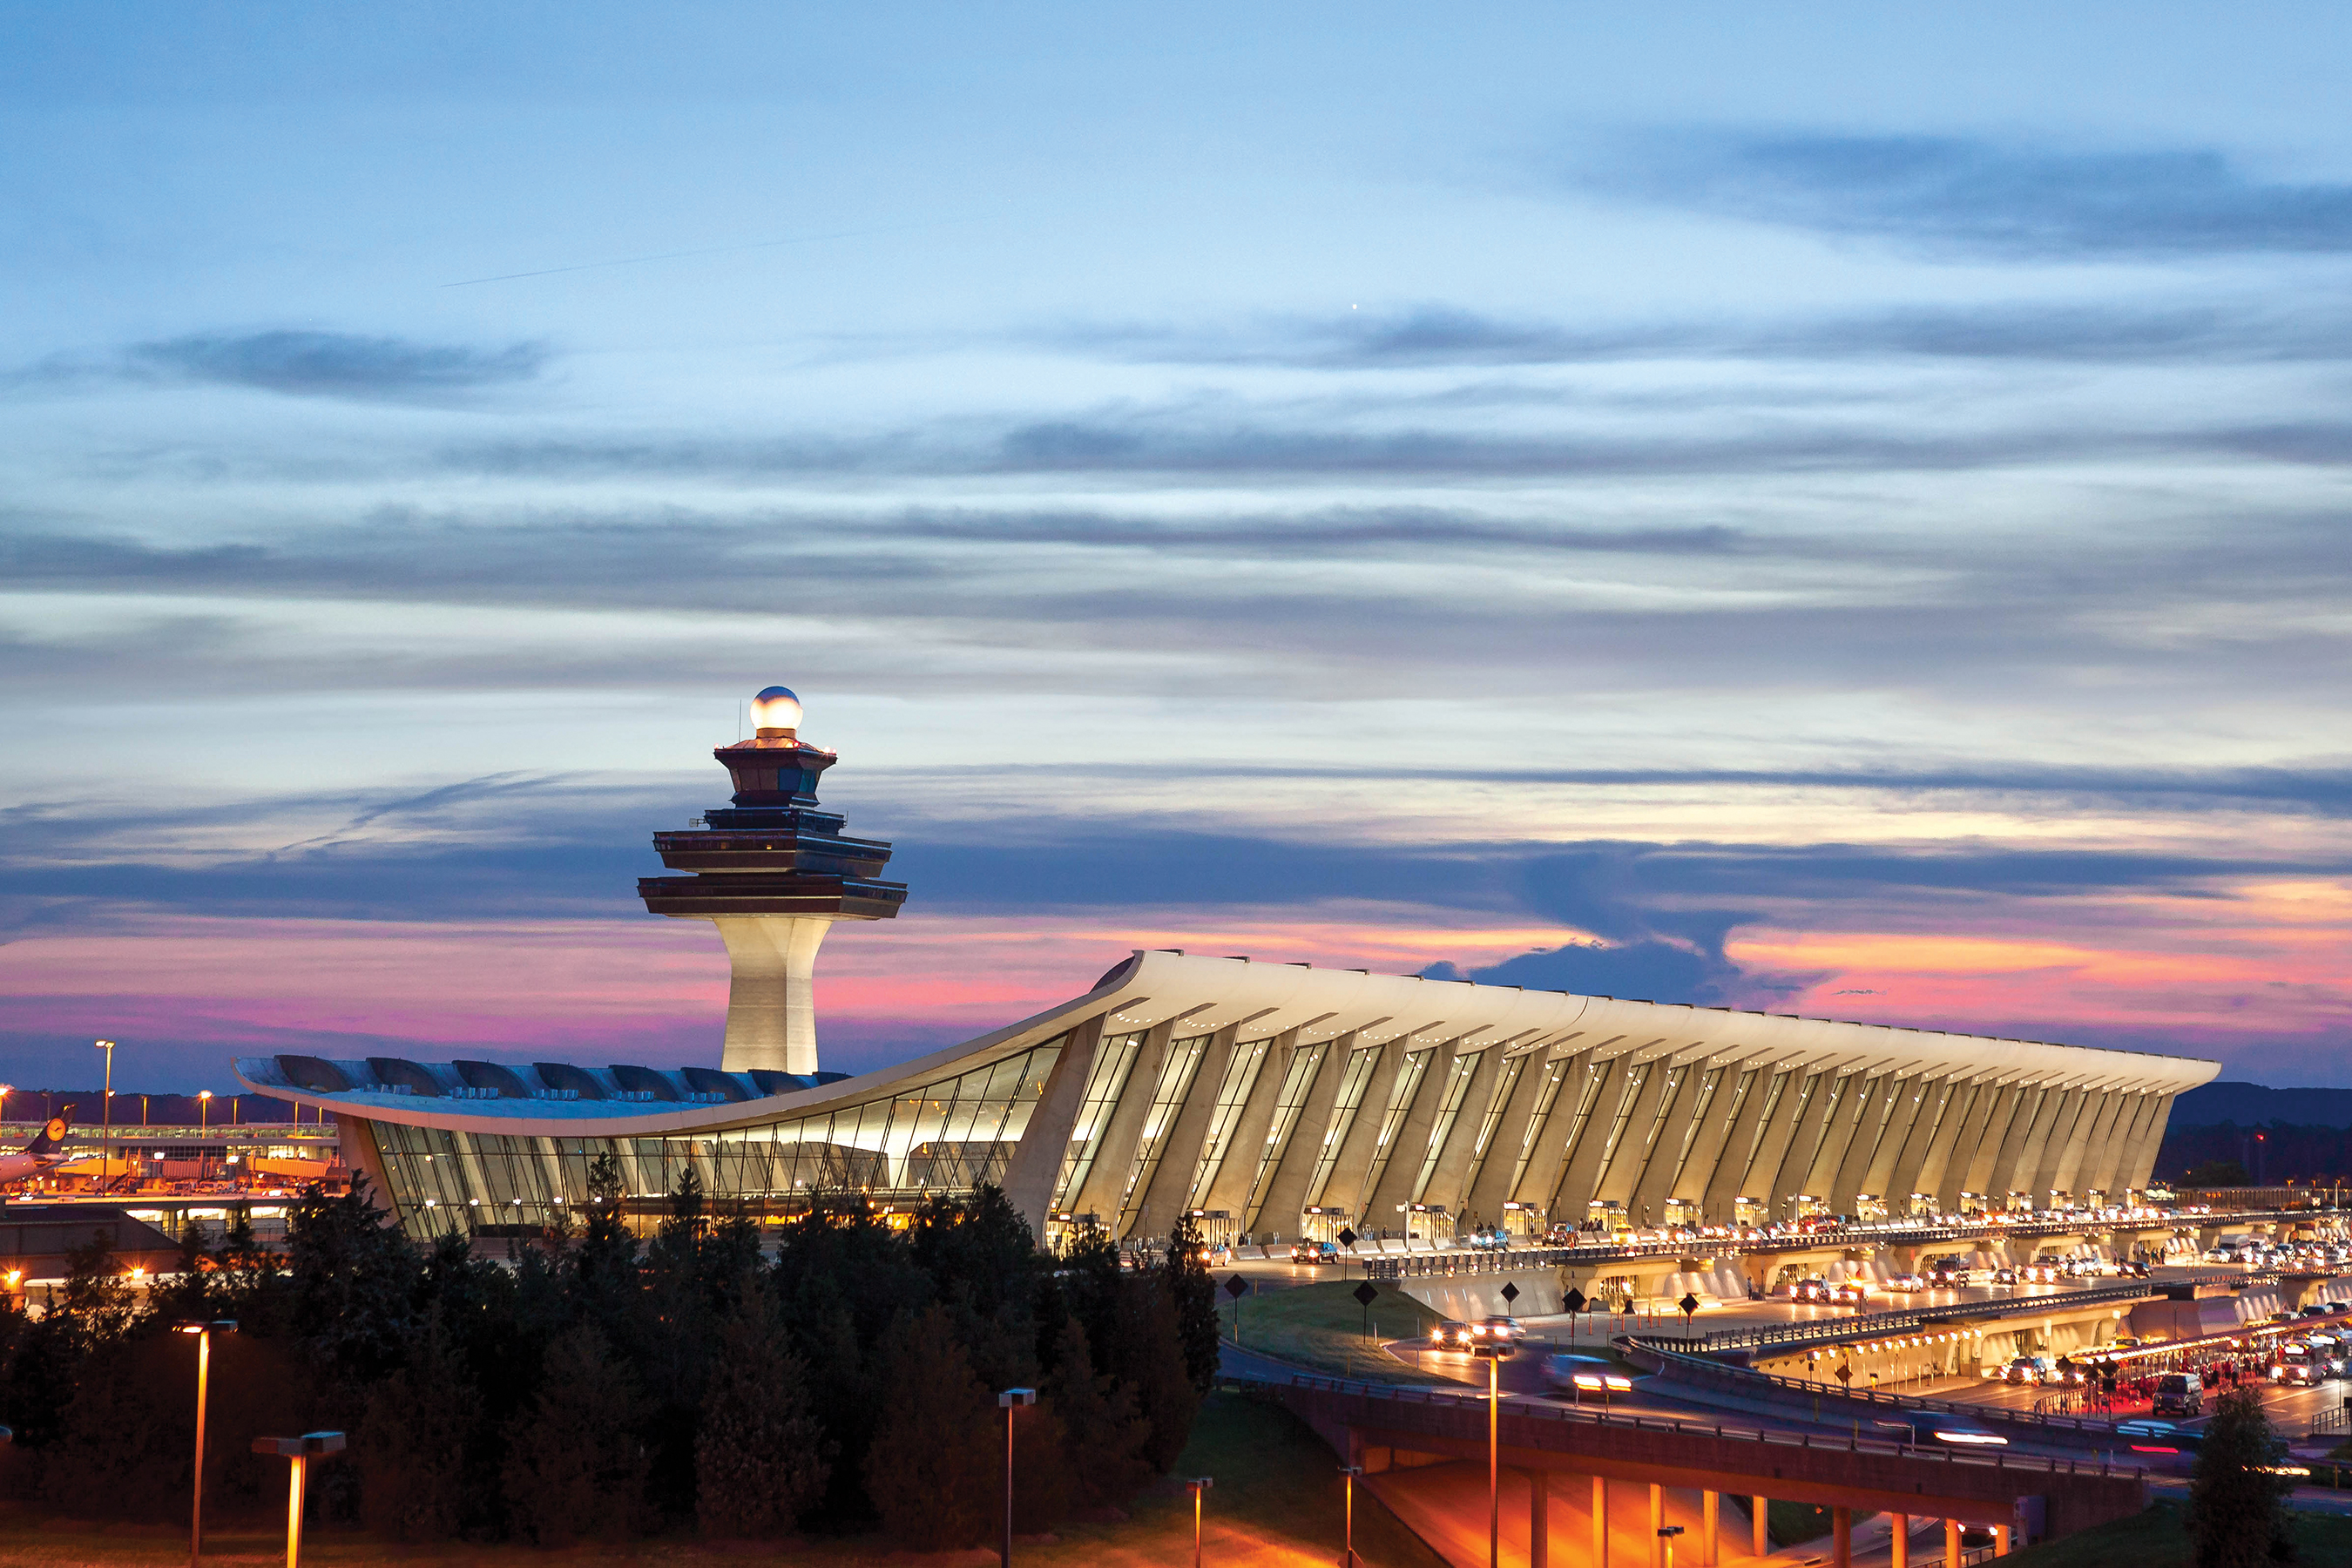 Dulles Airport, Fairfax County